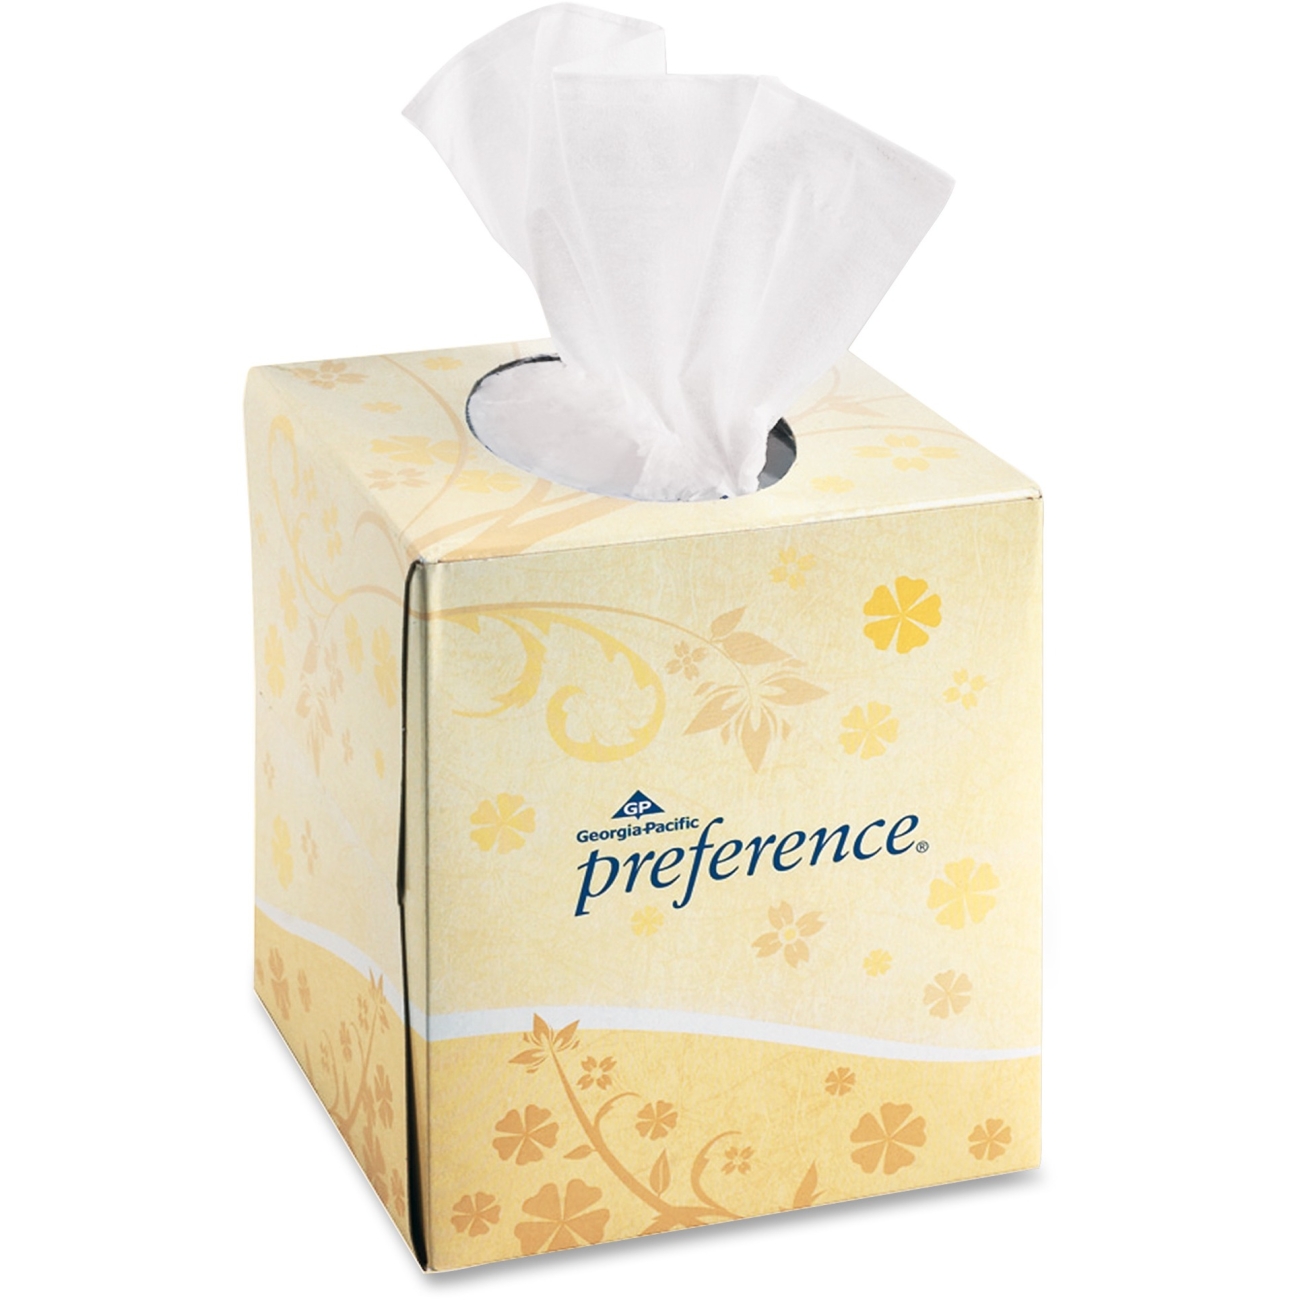 PREFERENCE WHITE FACIAL TISSUE
CUBE BOX 2PLY 36/100